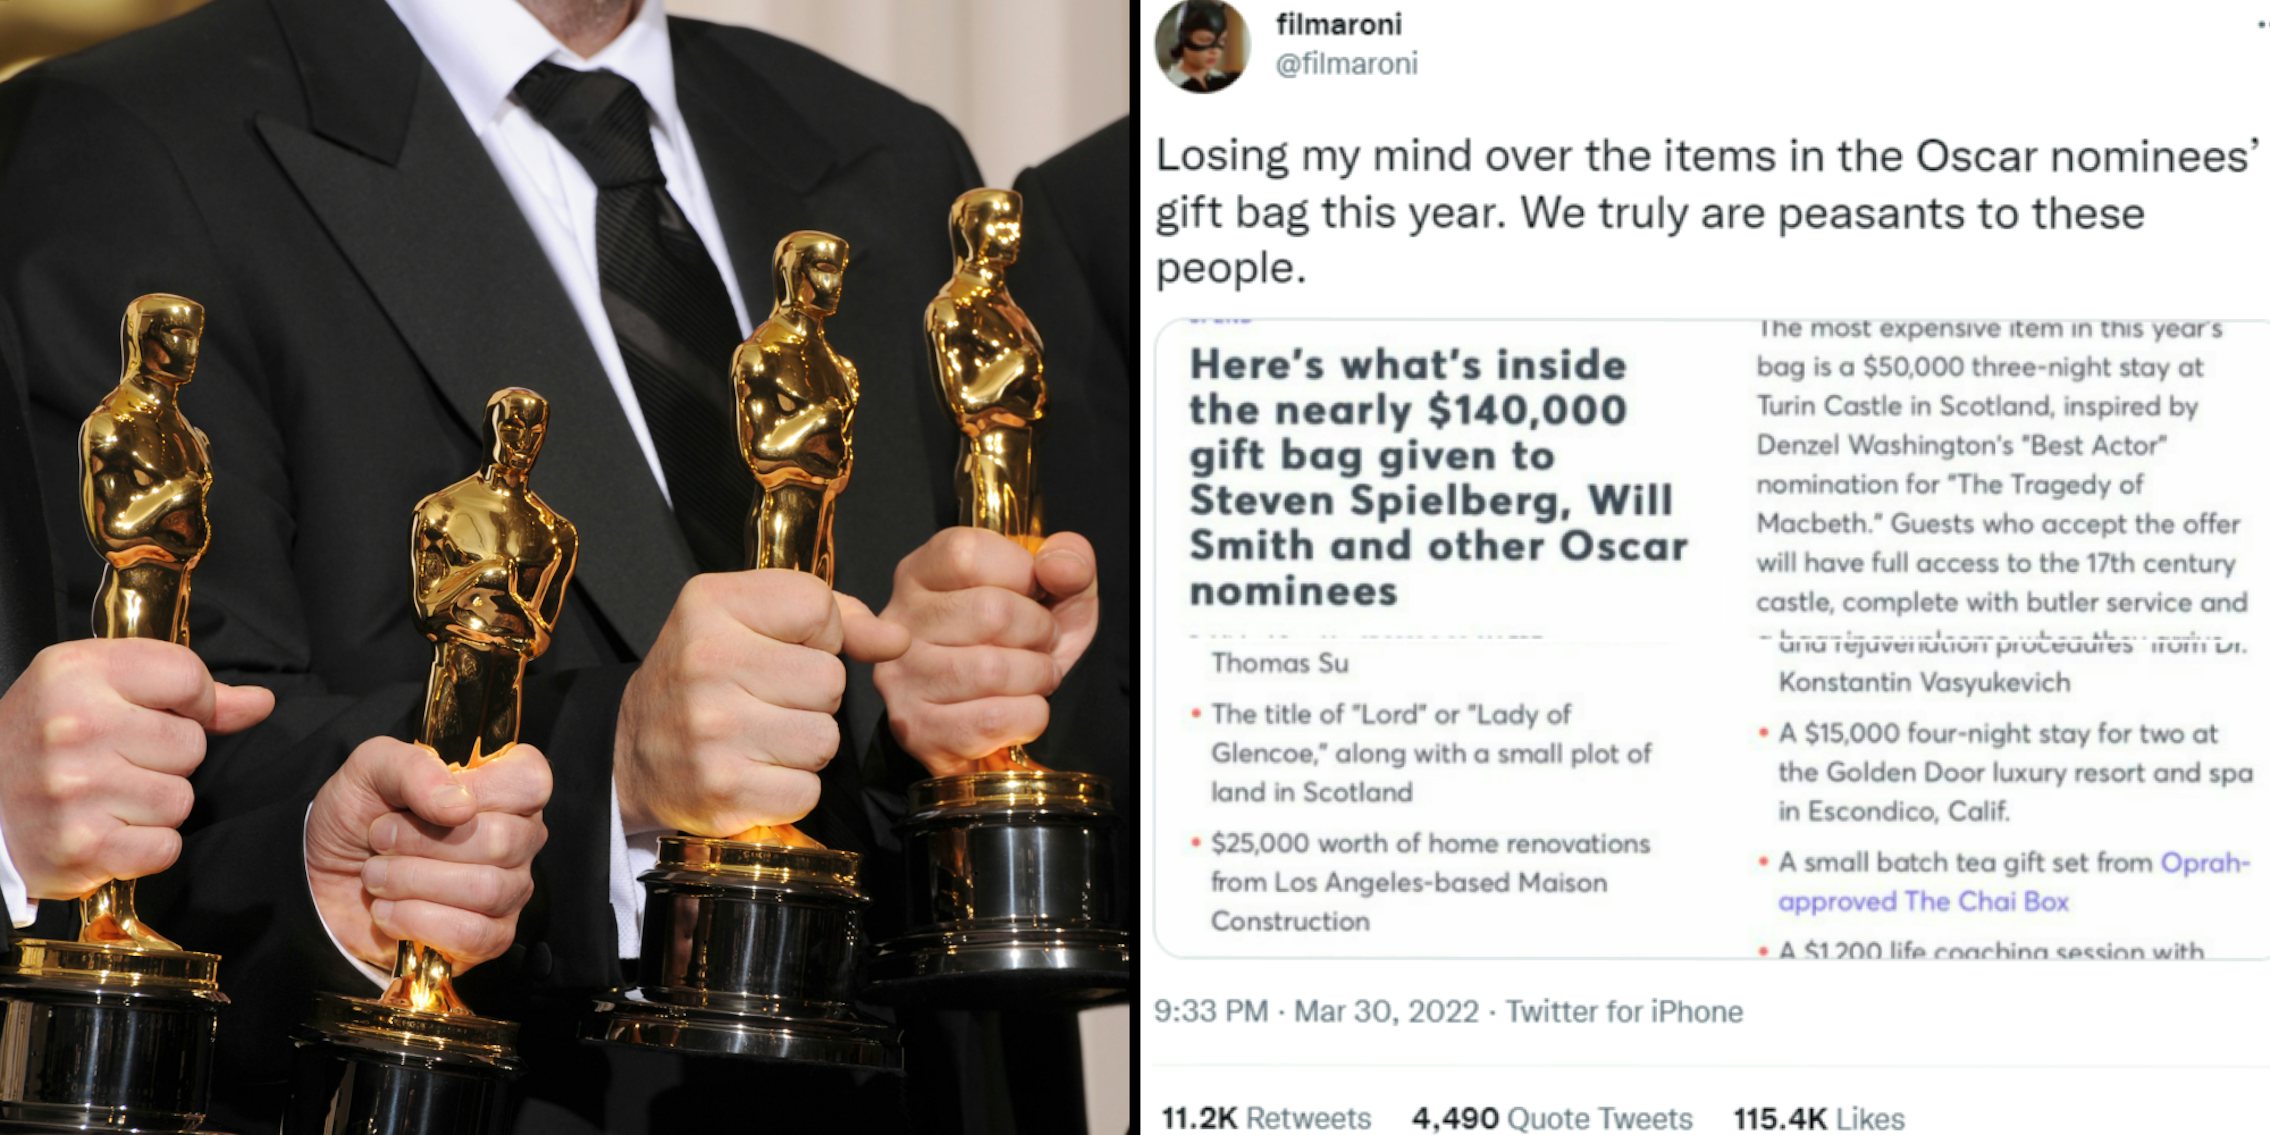 Men holding awards (l) @filmaroni's tweet 'Losing my mind over the items in the Oscar nominee's gift bag this year. We truly are peasants to these people' (r)